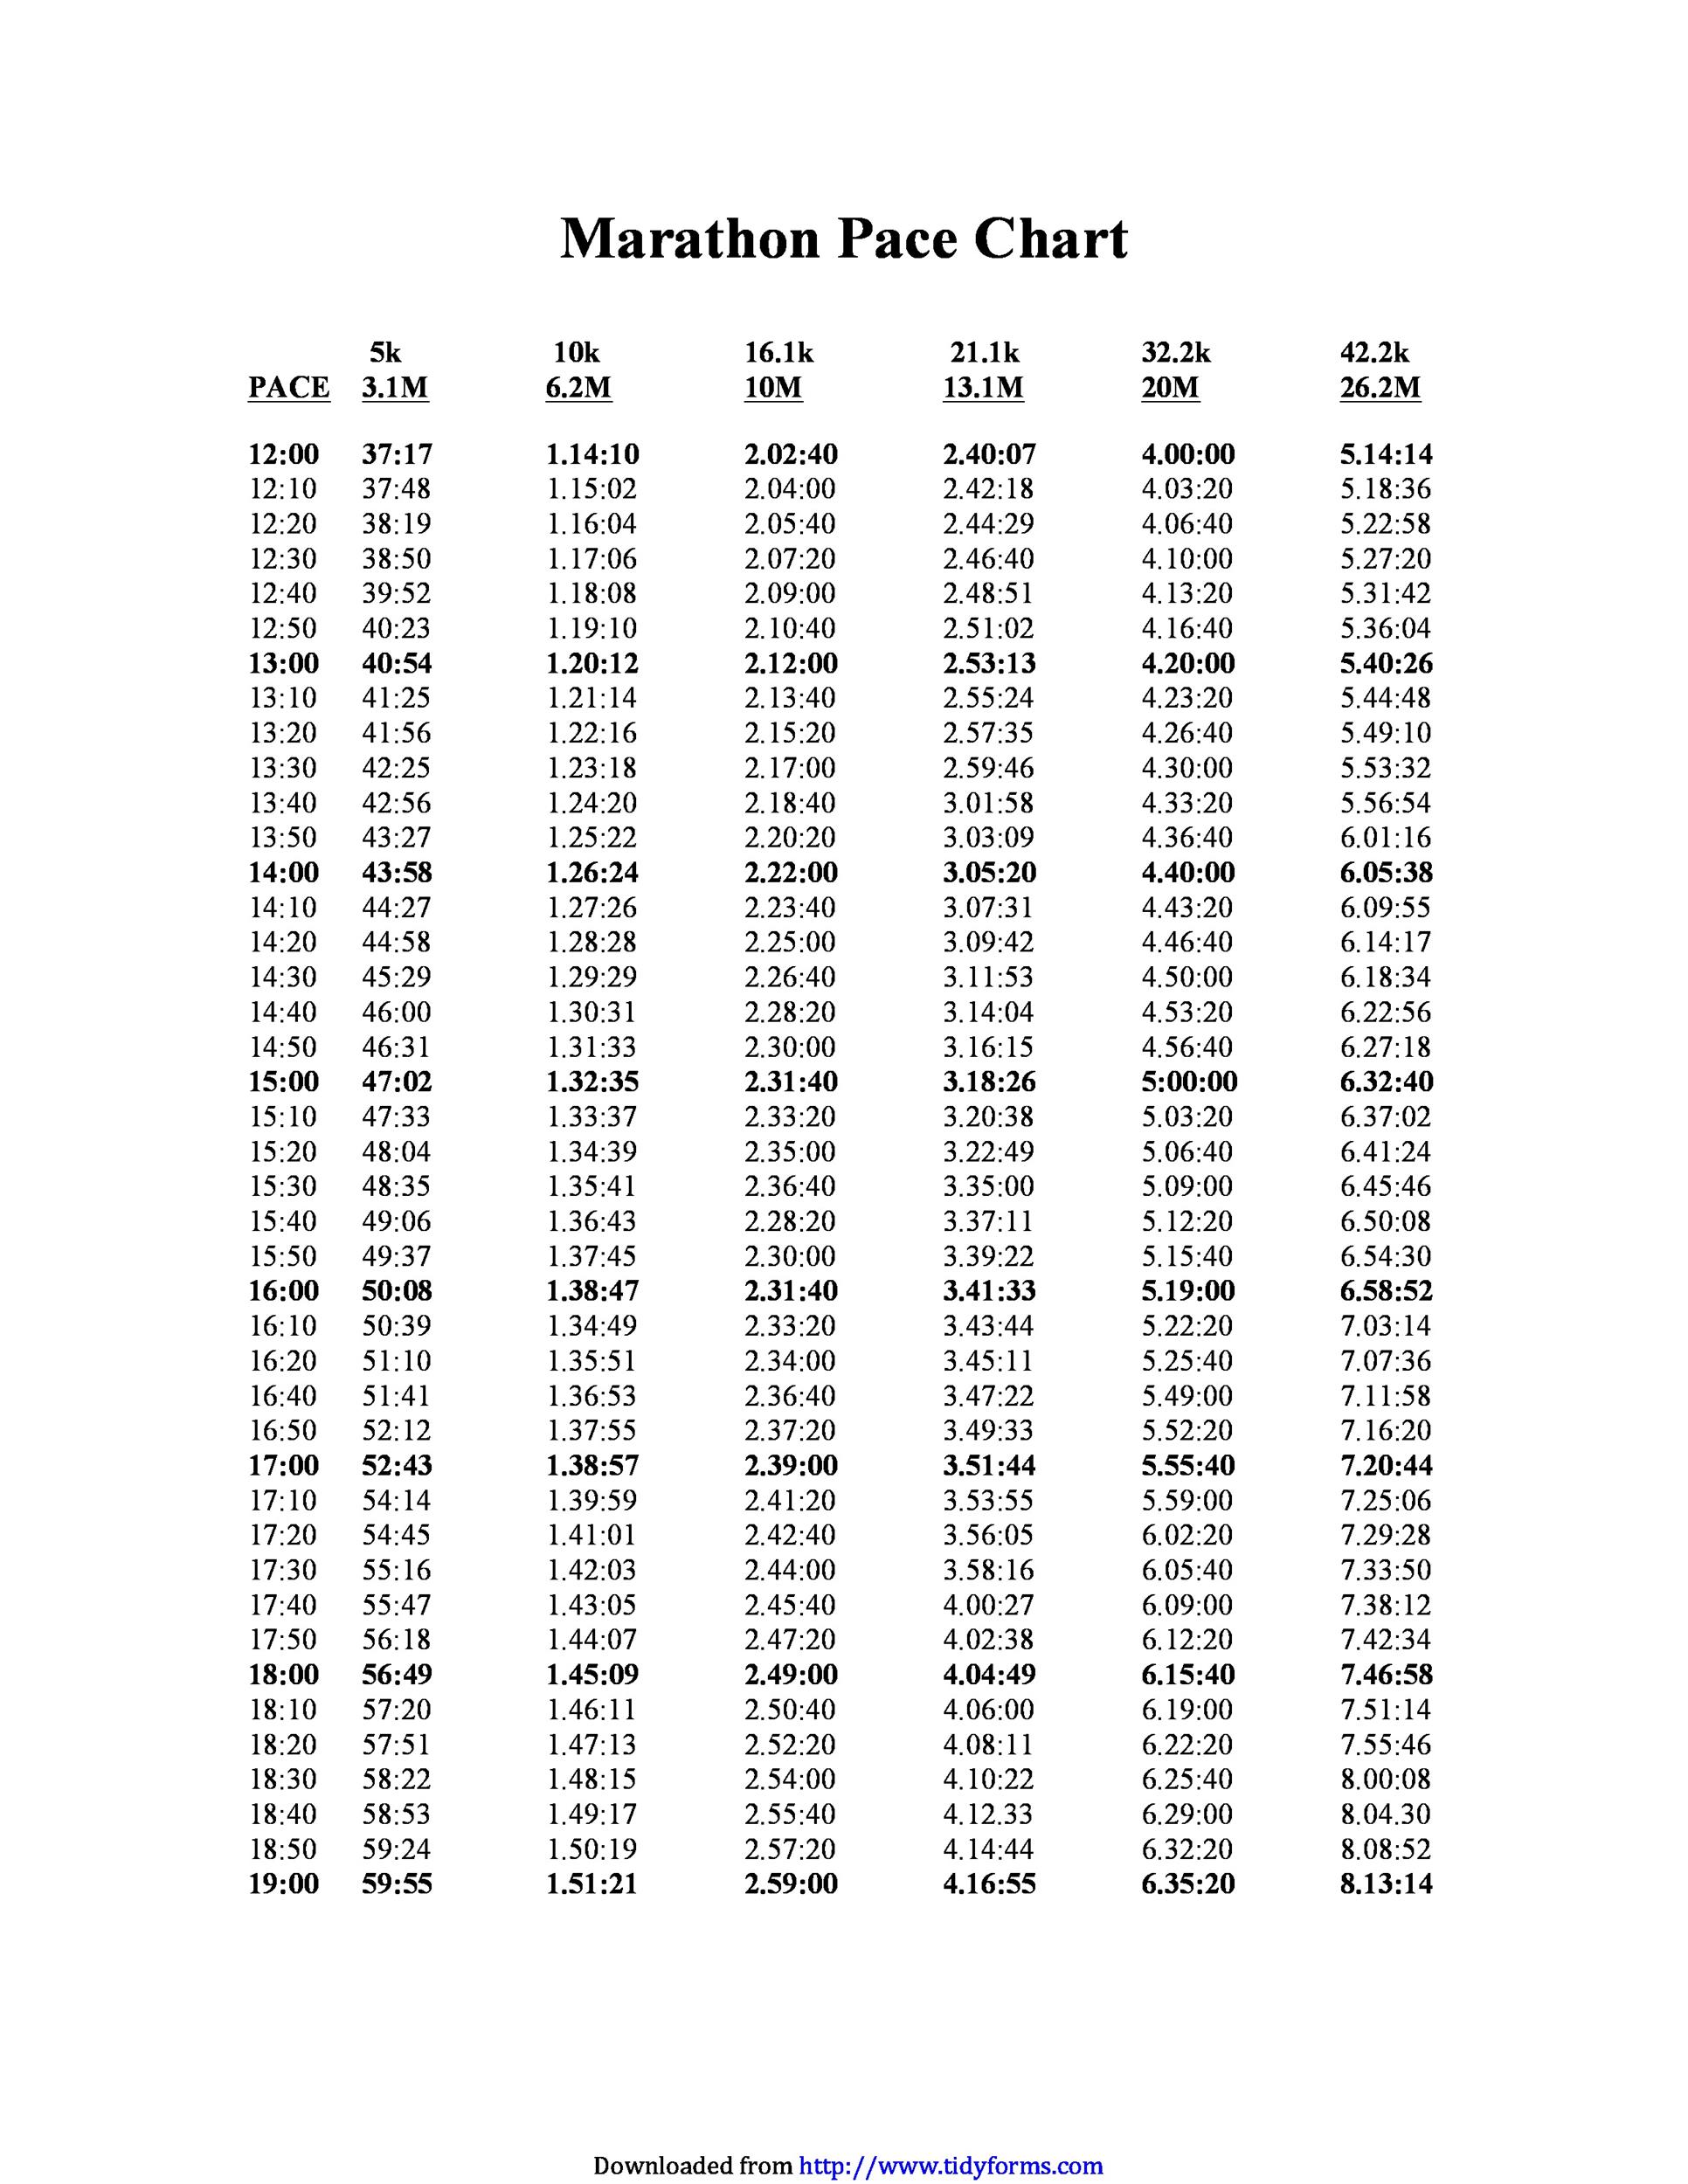 Speed Pace Chart